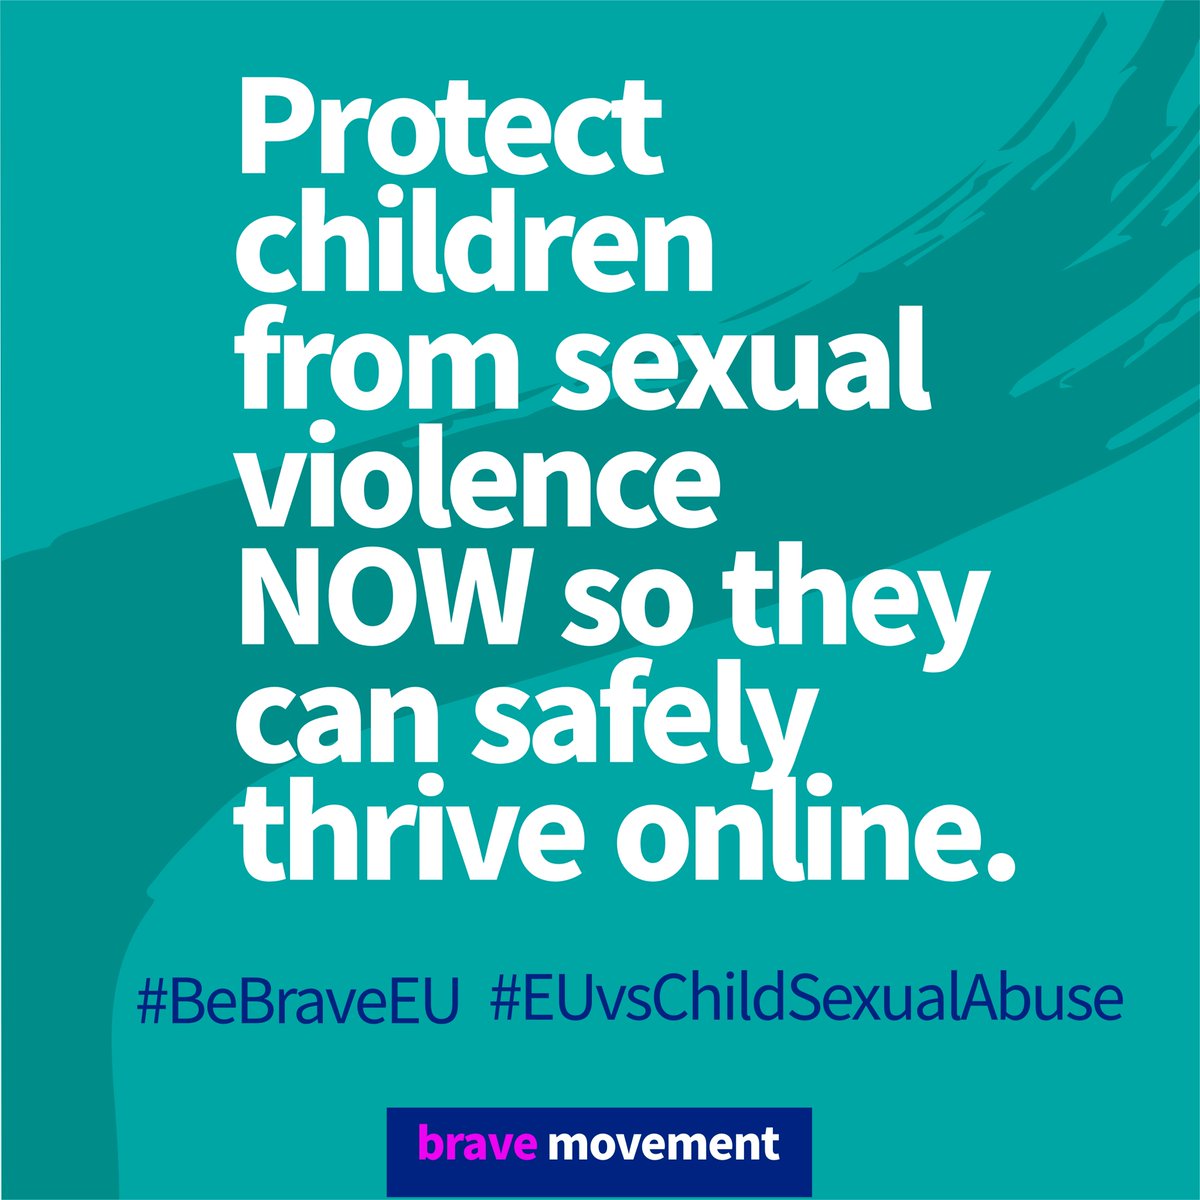 We stand by survivors and want the #EU to #BeBrave and act urgently to ensure that children can safely thrive online. #EUvsChildSexualAbuse
 
We need robust legislation now. You can also show your support by signing the #JusticeInitiative petition✍️
justice-initiative.eu/petition/